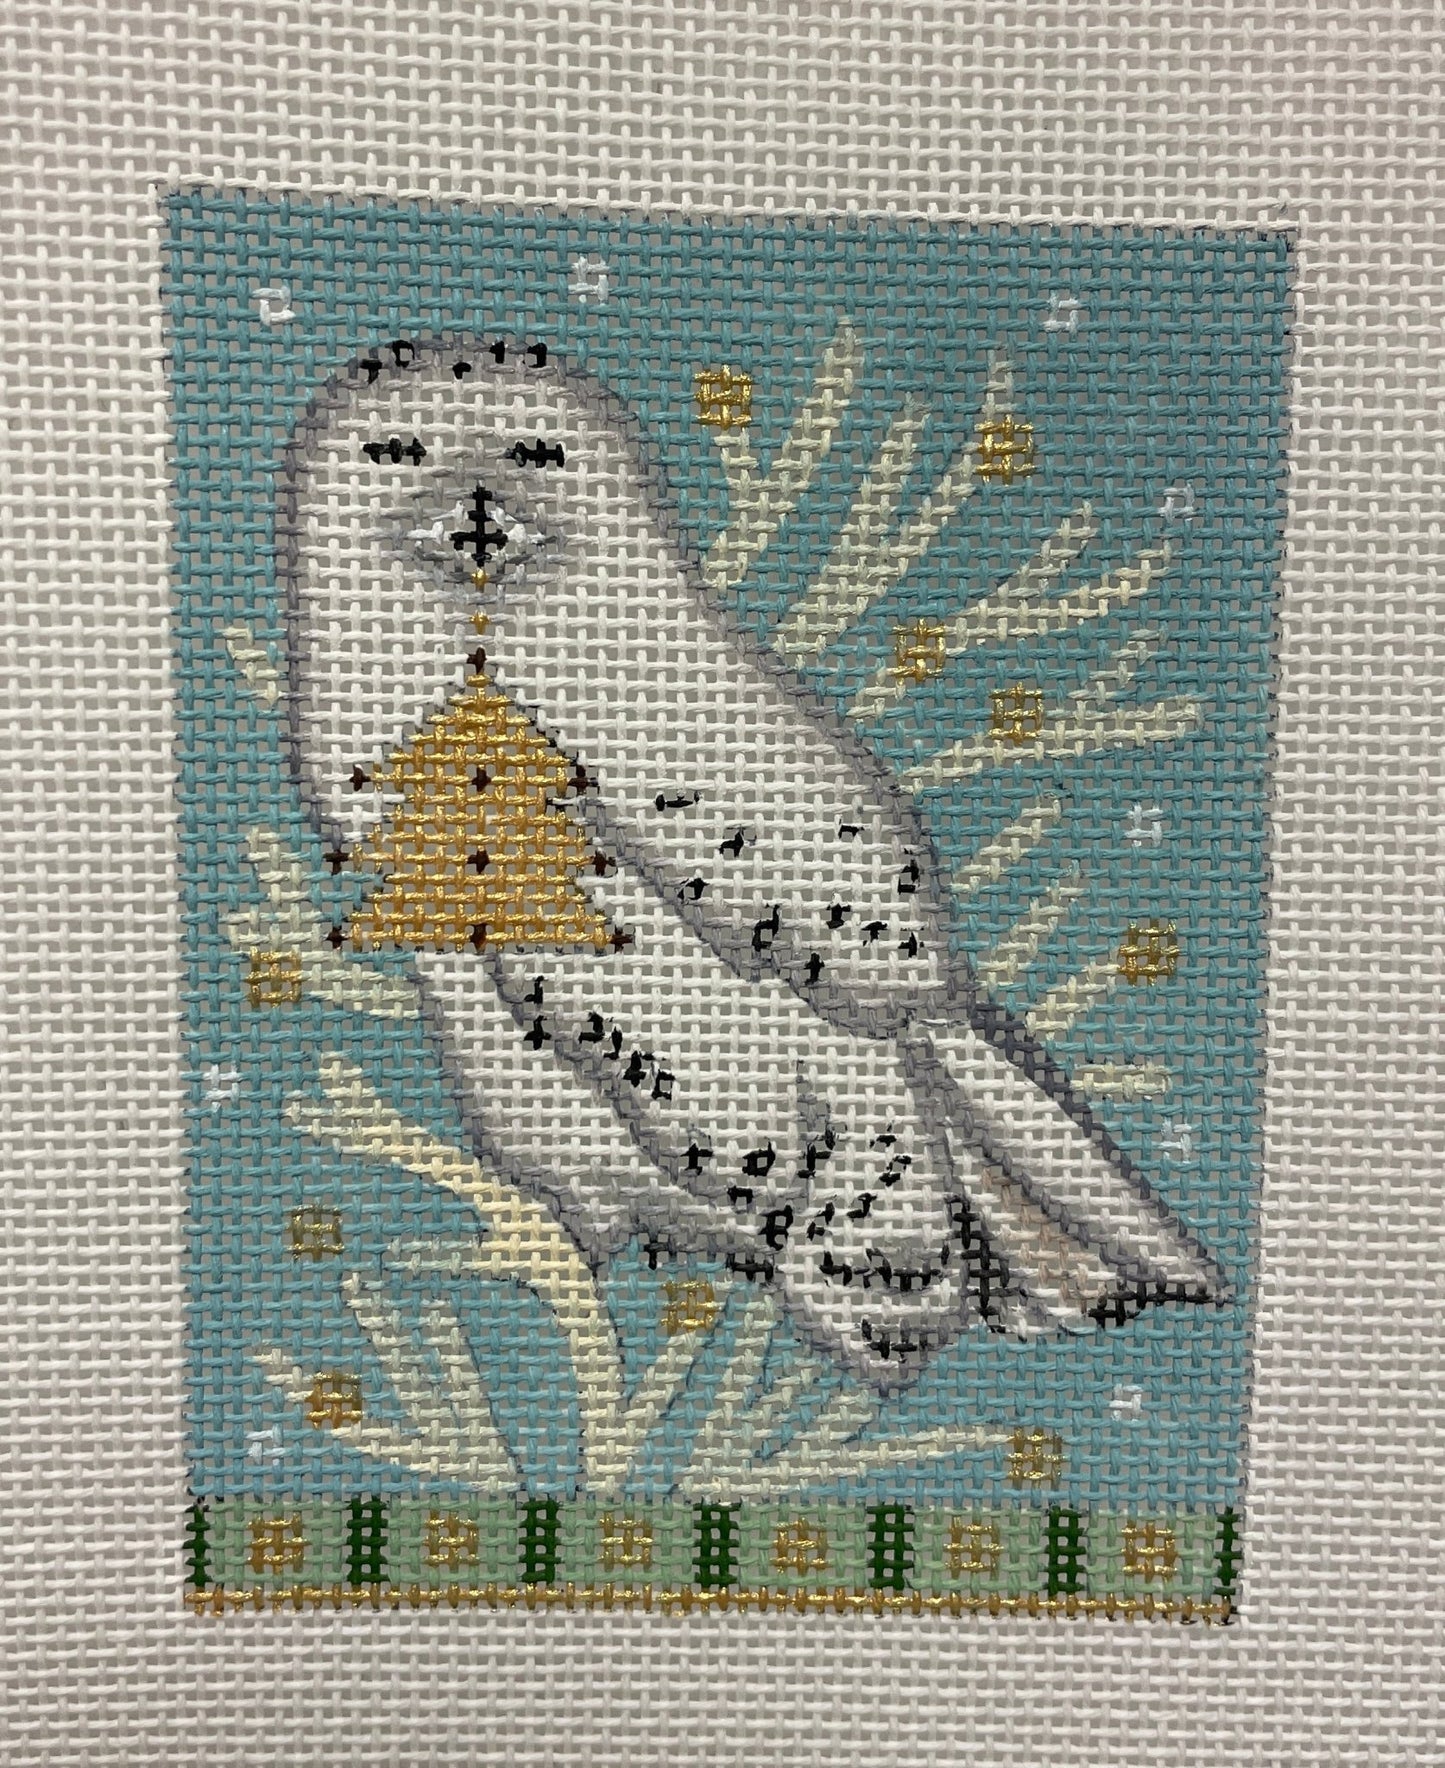 Snowy Owl - The Flying Needles